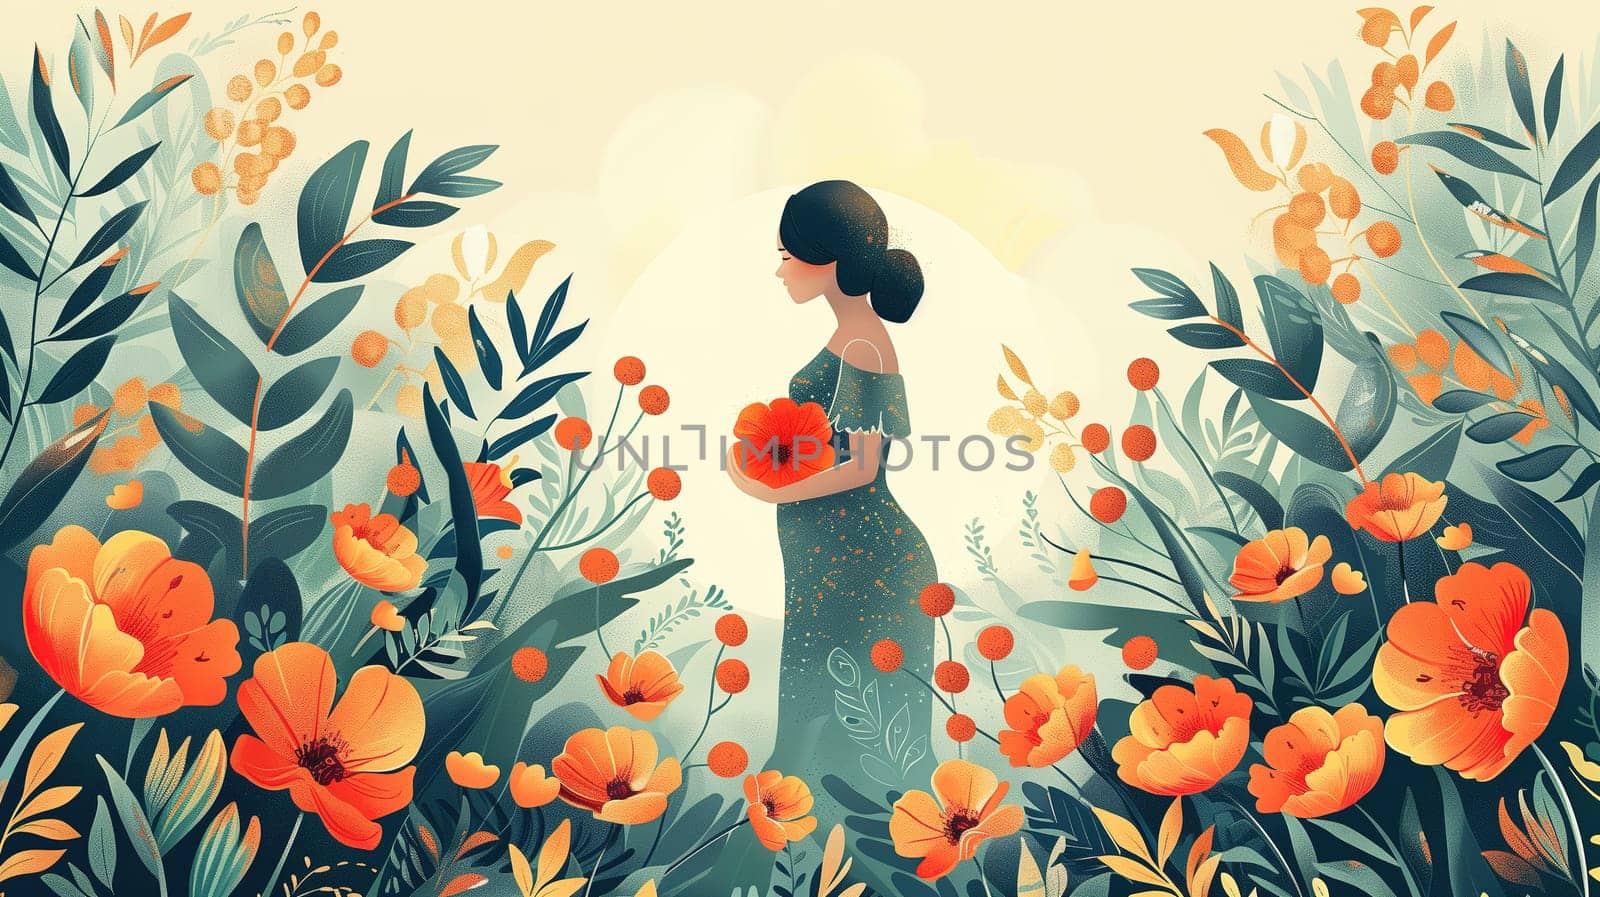 Woman Standing in Field of Flowers by TRMK